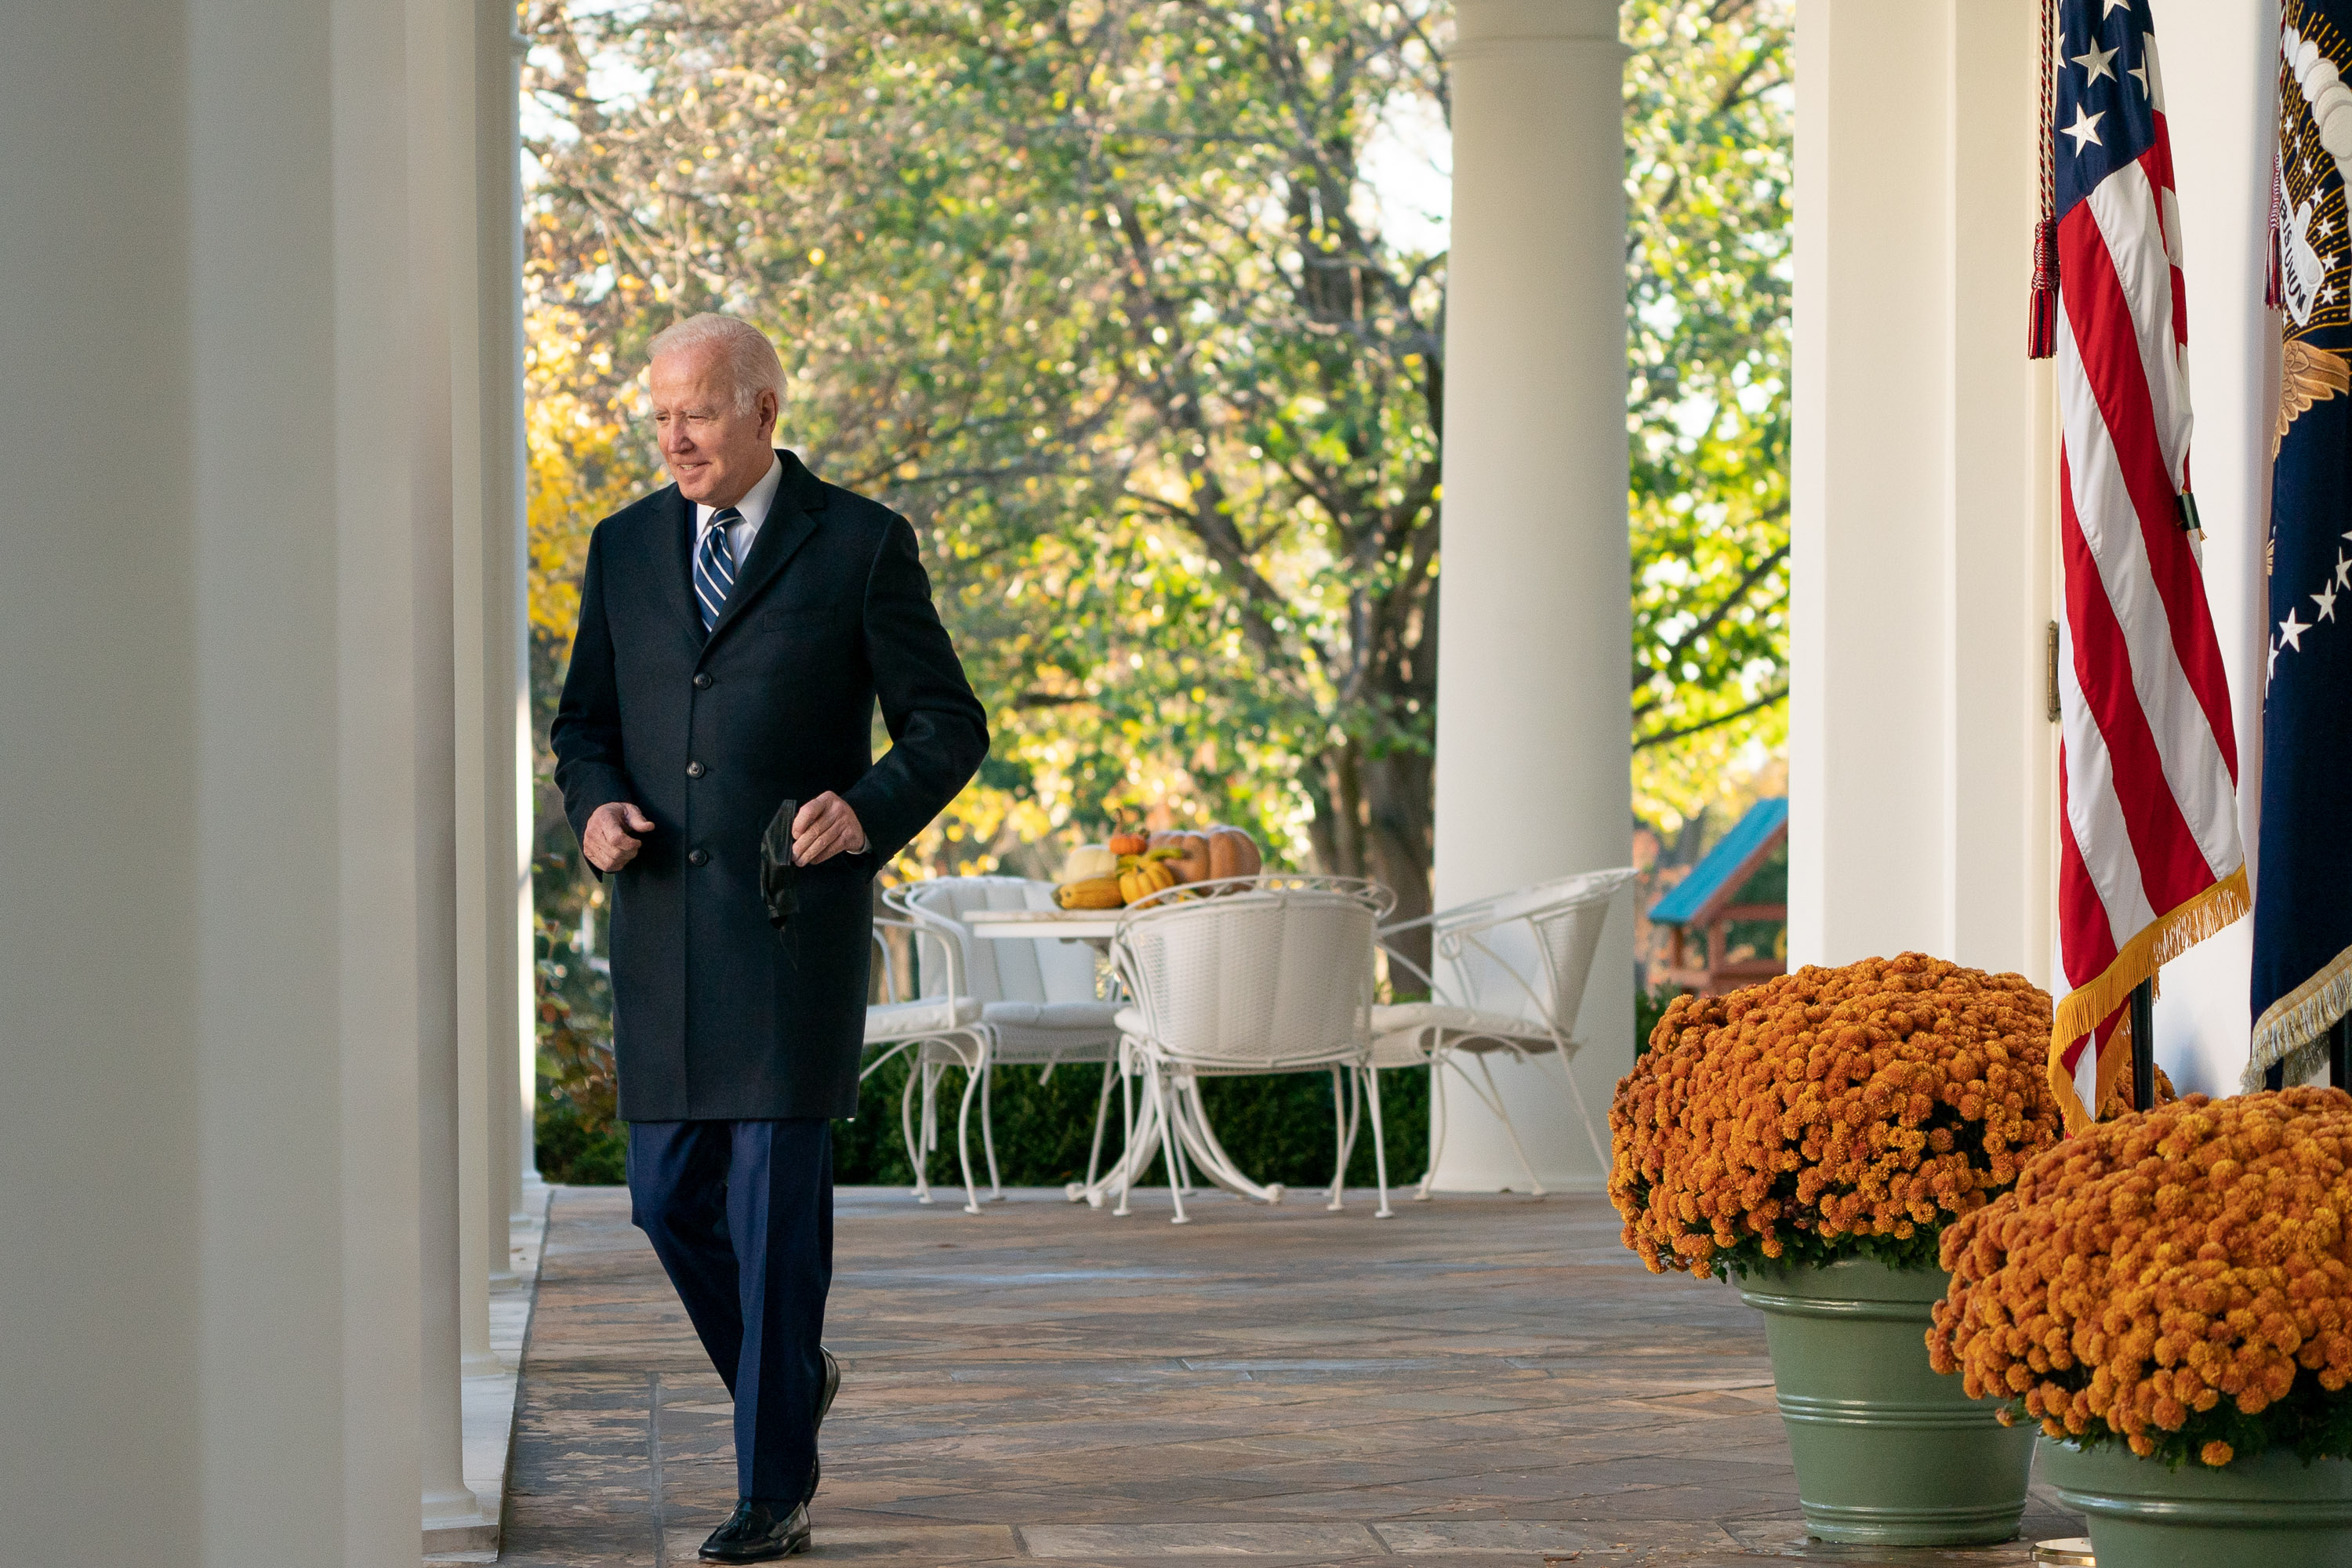 Photo of Joe Biden at the White House, released on his 80th birthday on 20 November 2022